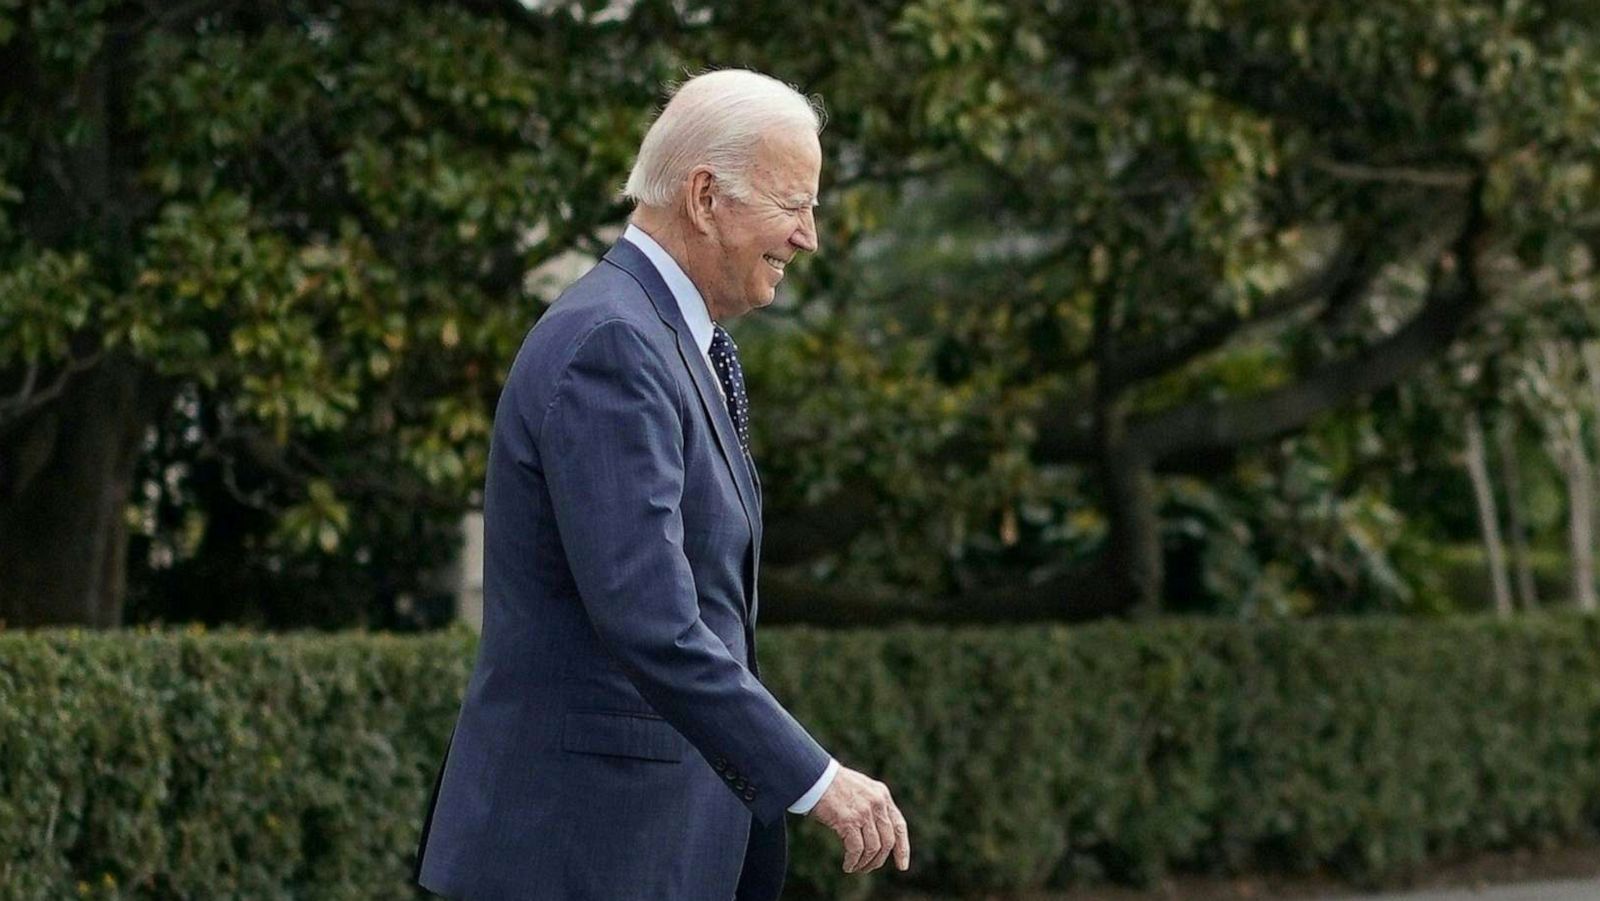 Biden 'remains fit for duty,' White House says after 2nd presidential physical - ABC News